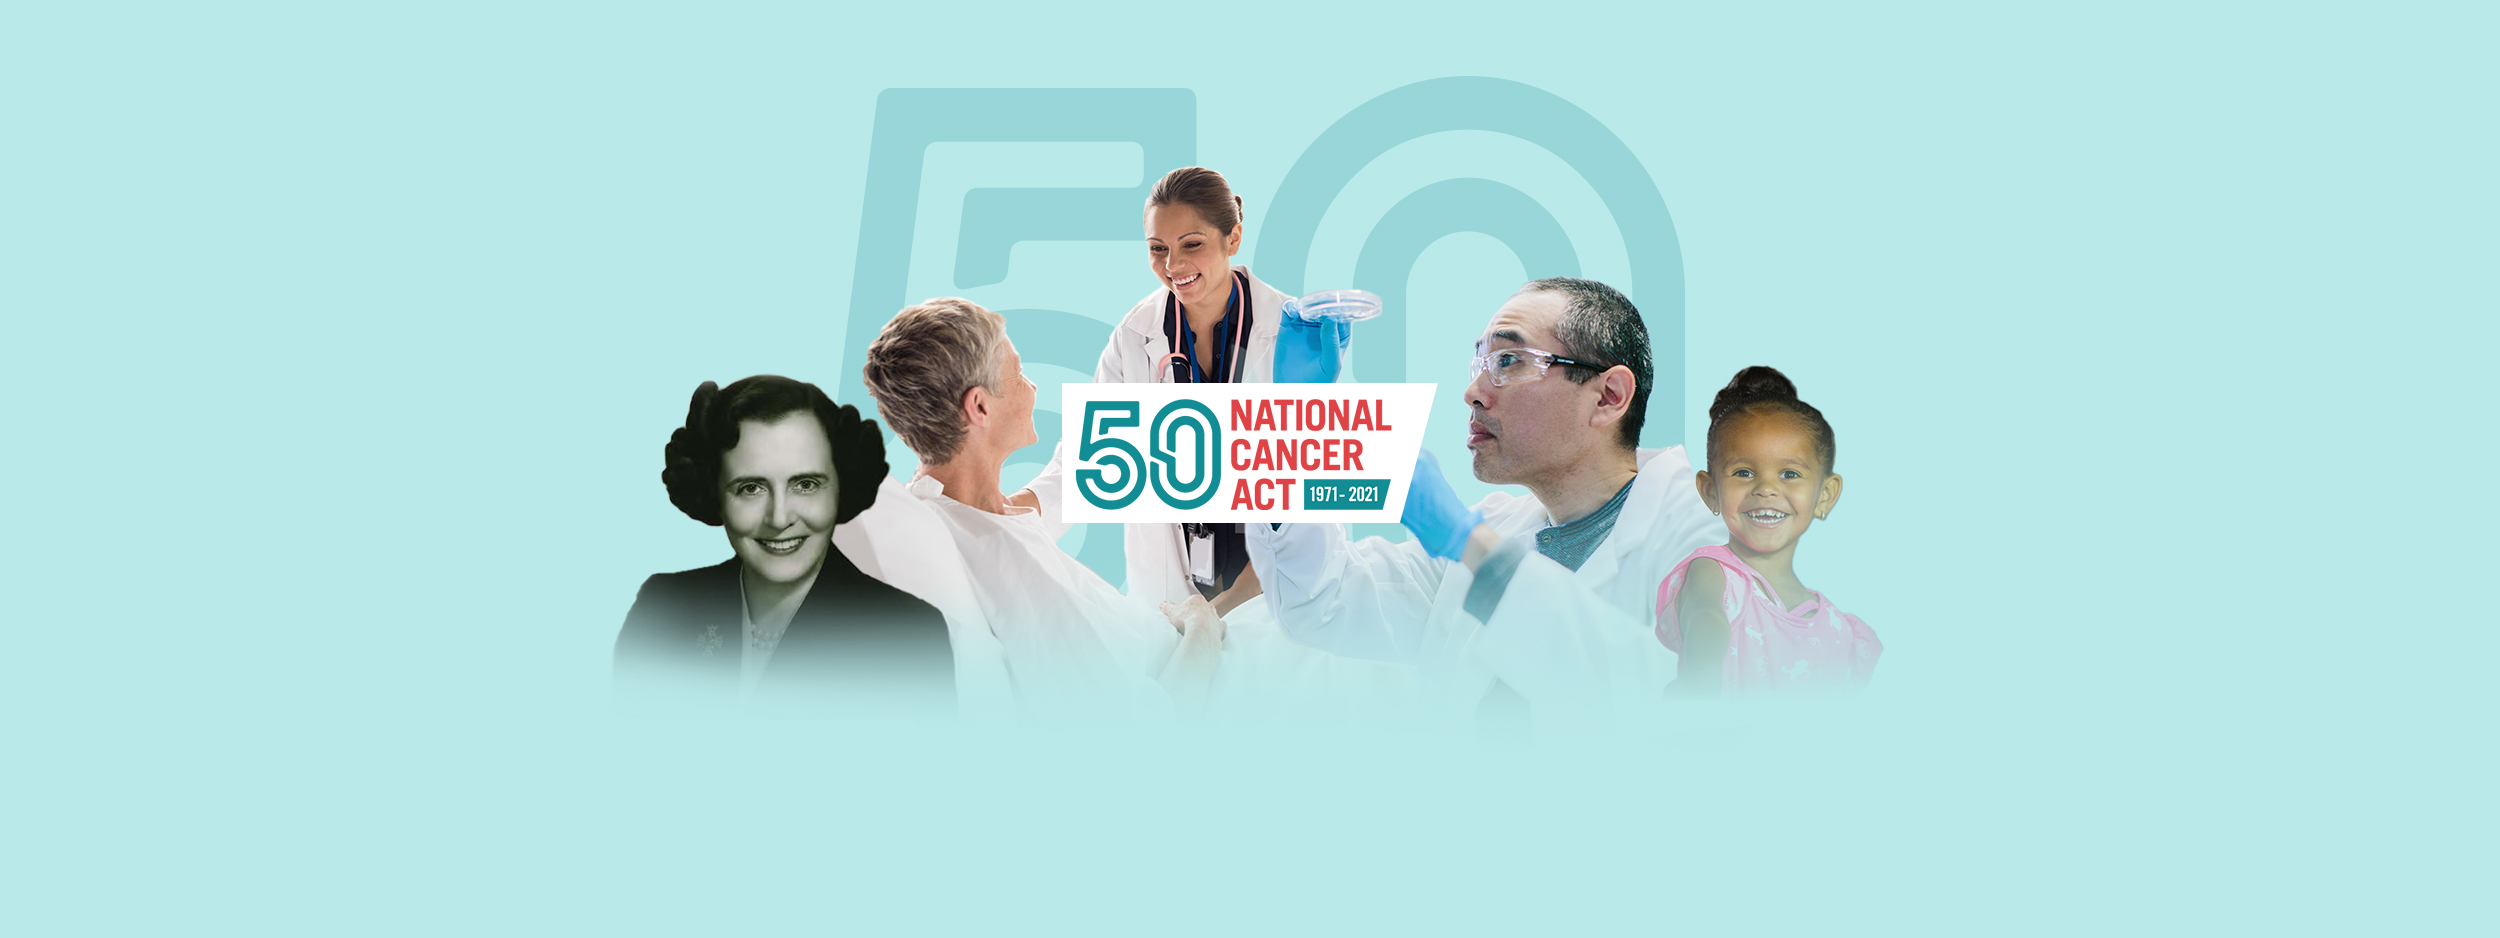 National Cancer Act 50th Anniversary Commemoration